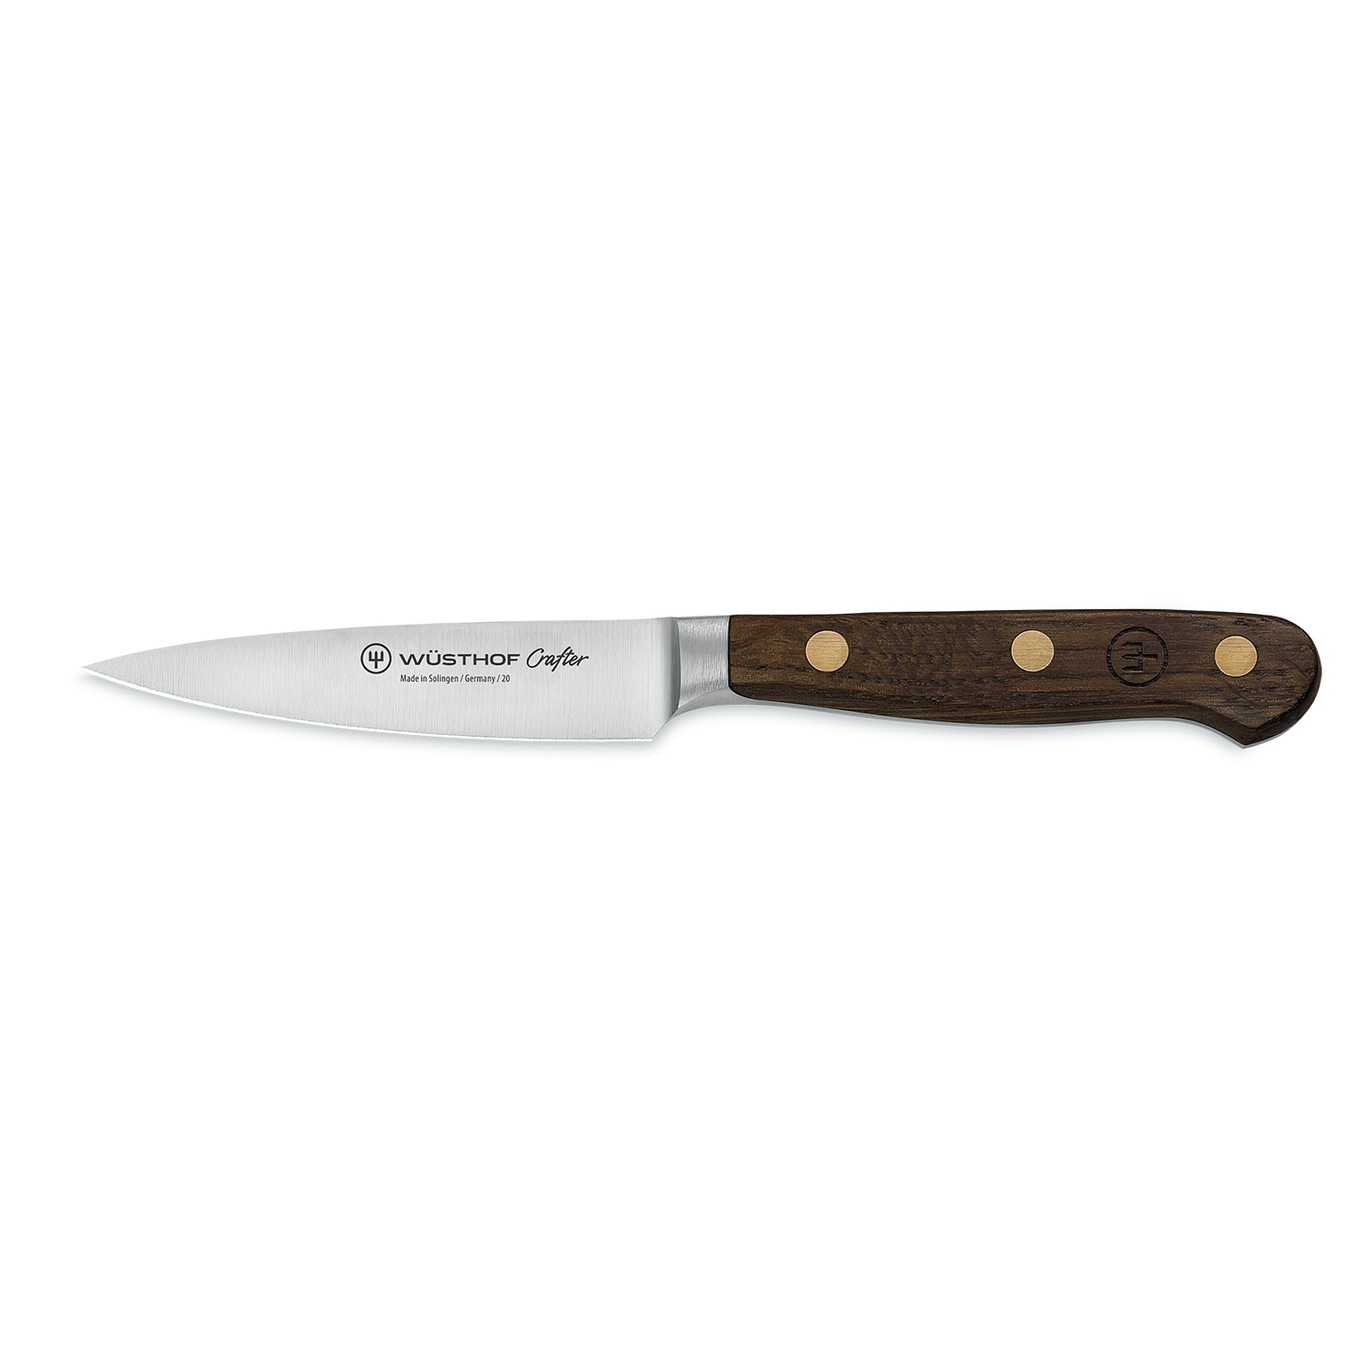 Crafter Paring Knife, 9 cm